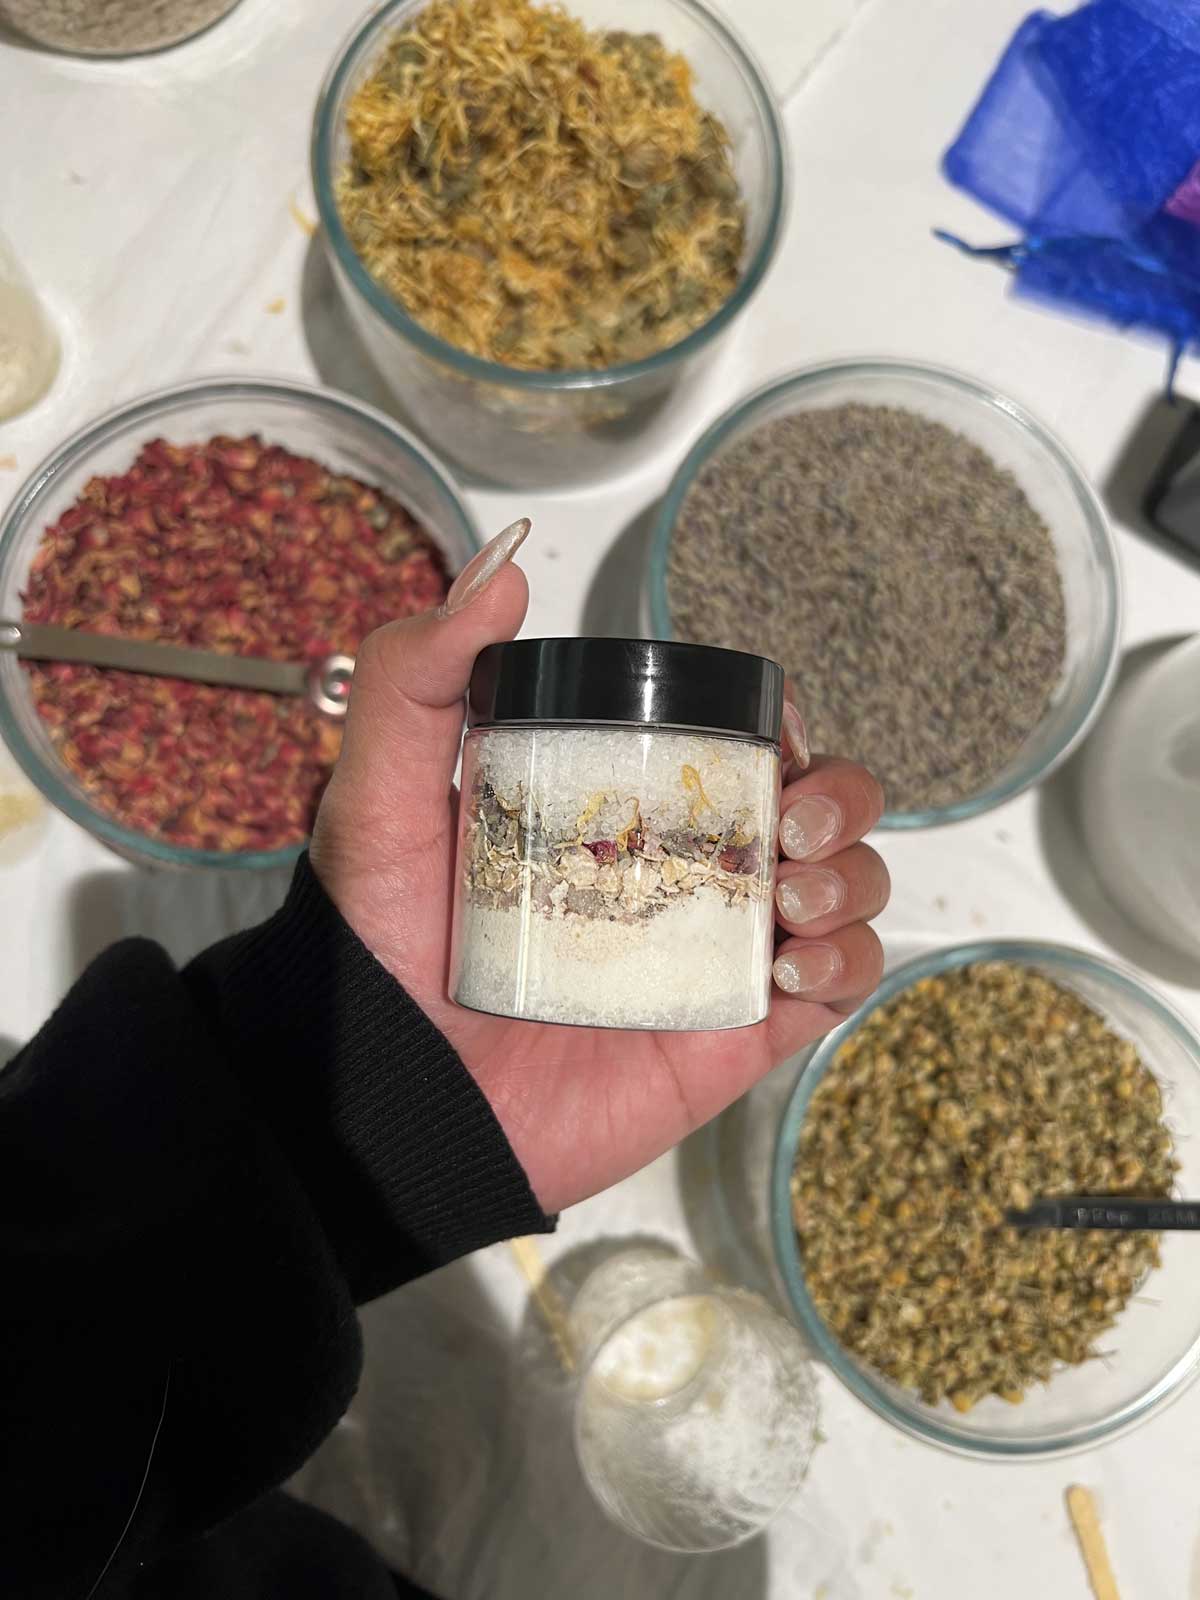 A person's hand holding a jar of layered spices with various bowls of herbs and spices in the background.